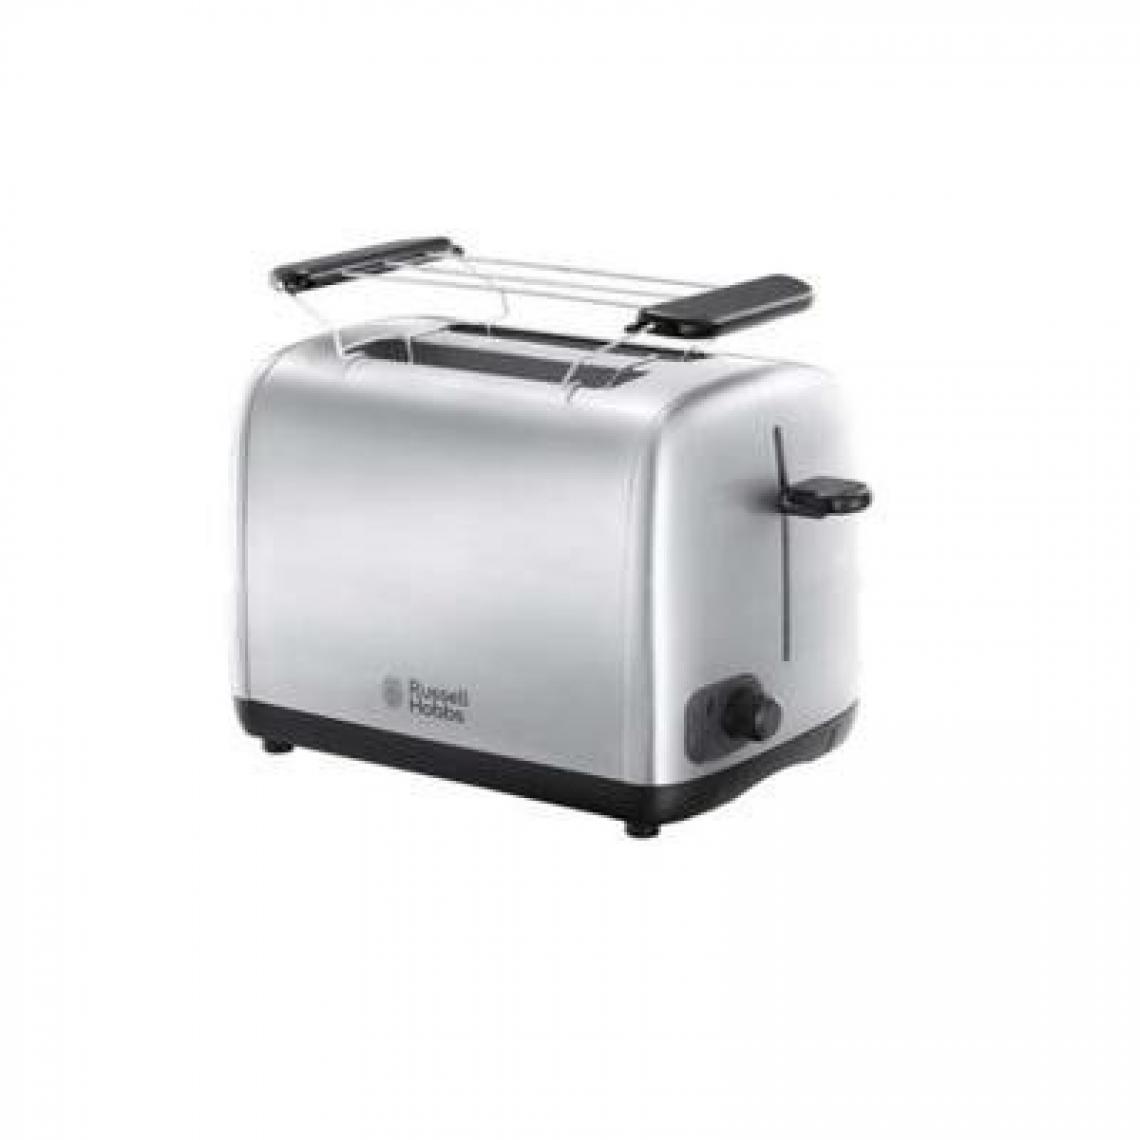 Russell Hobbs - Russell Hobbs Grille-pain Adventure Argenté 850 W - Grille-pain